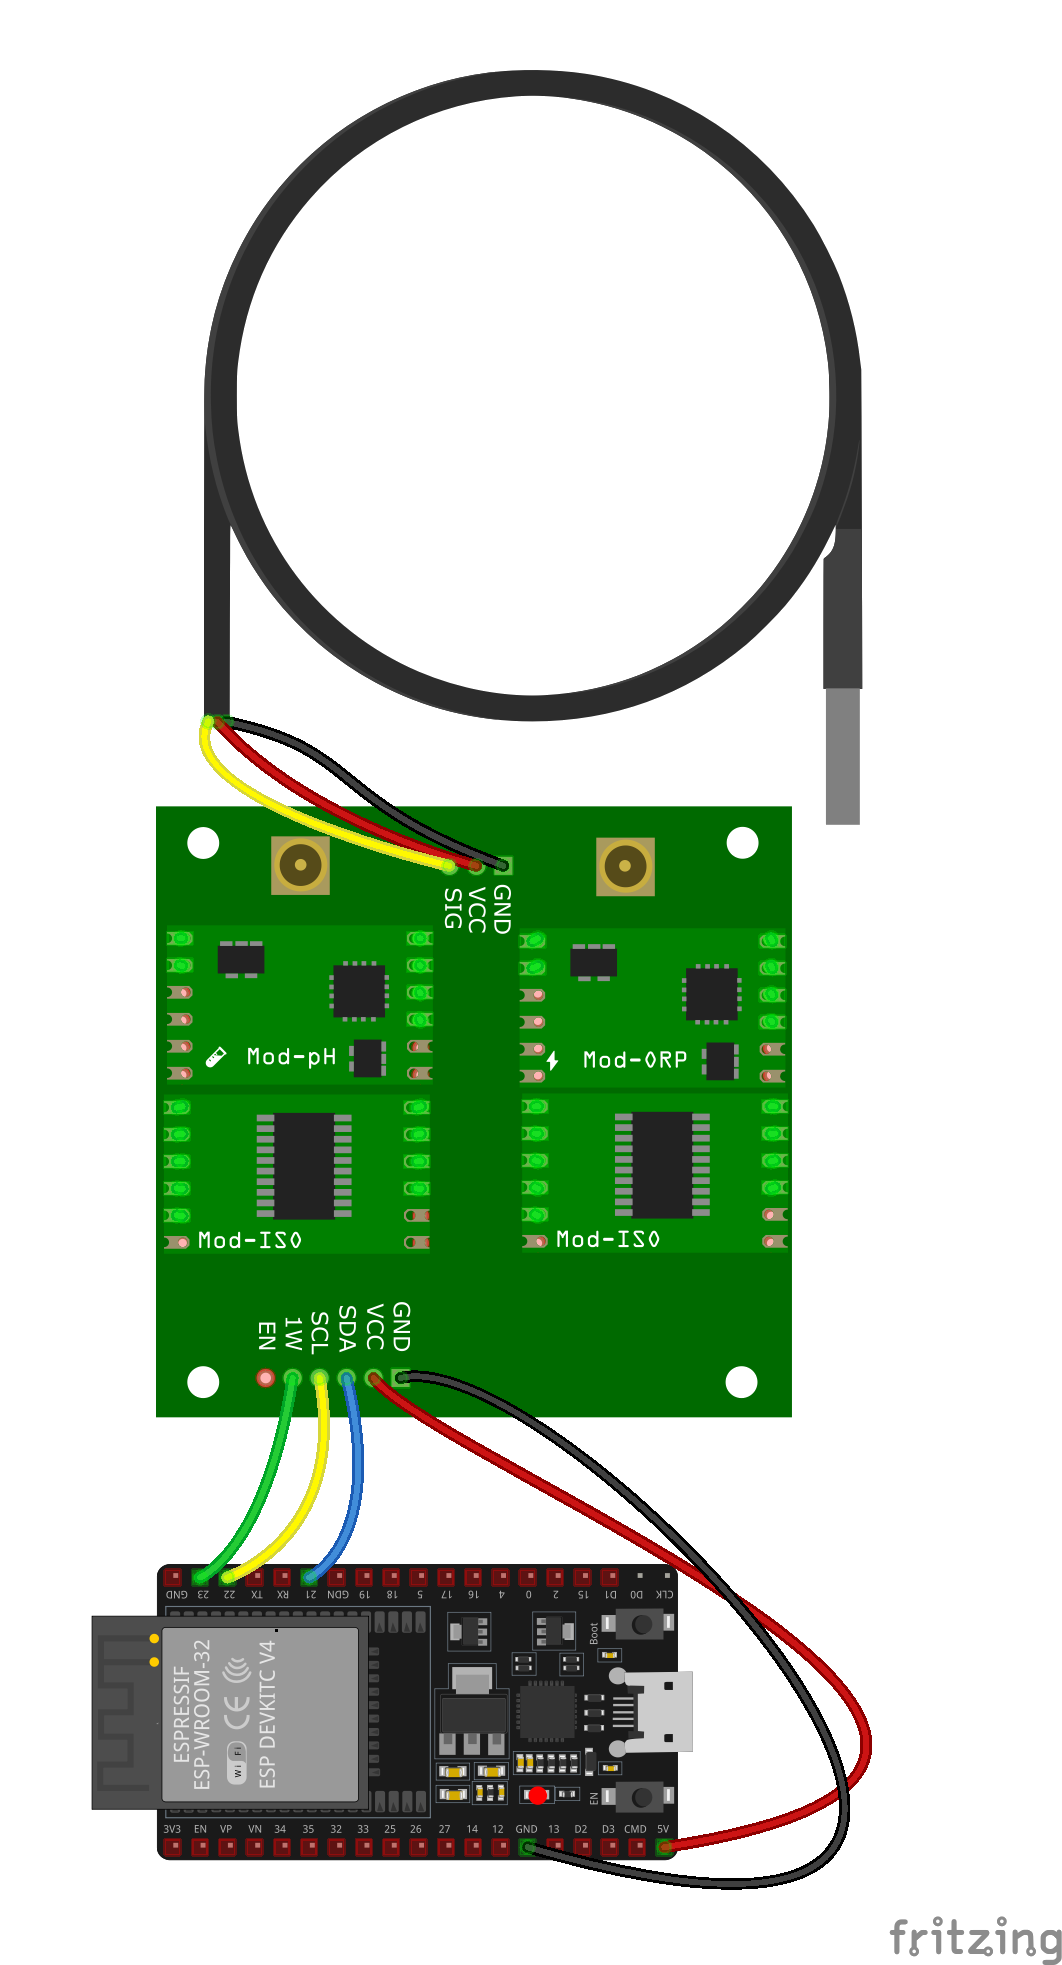 Wiring for ESP32 and the carrier board